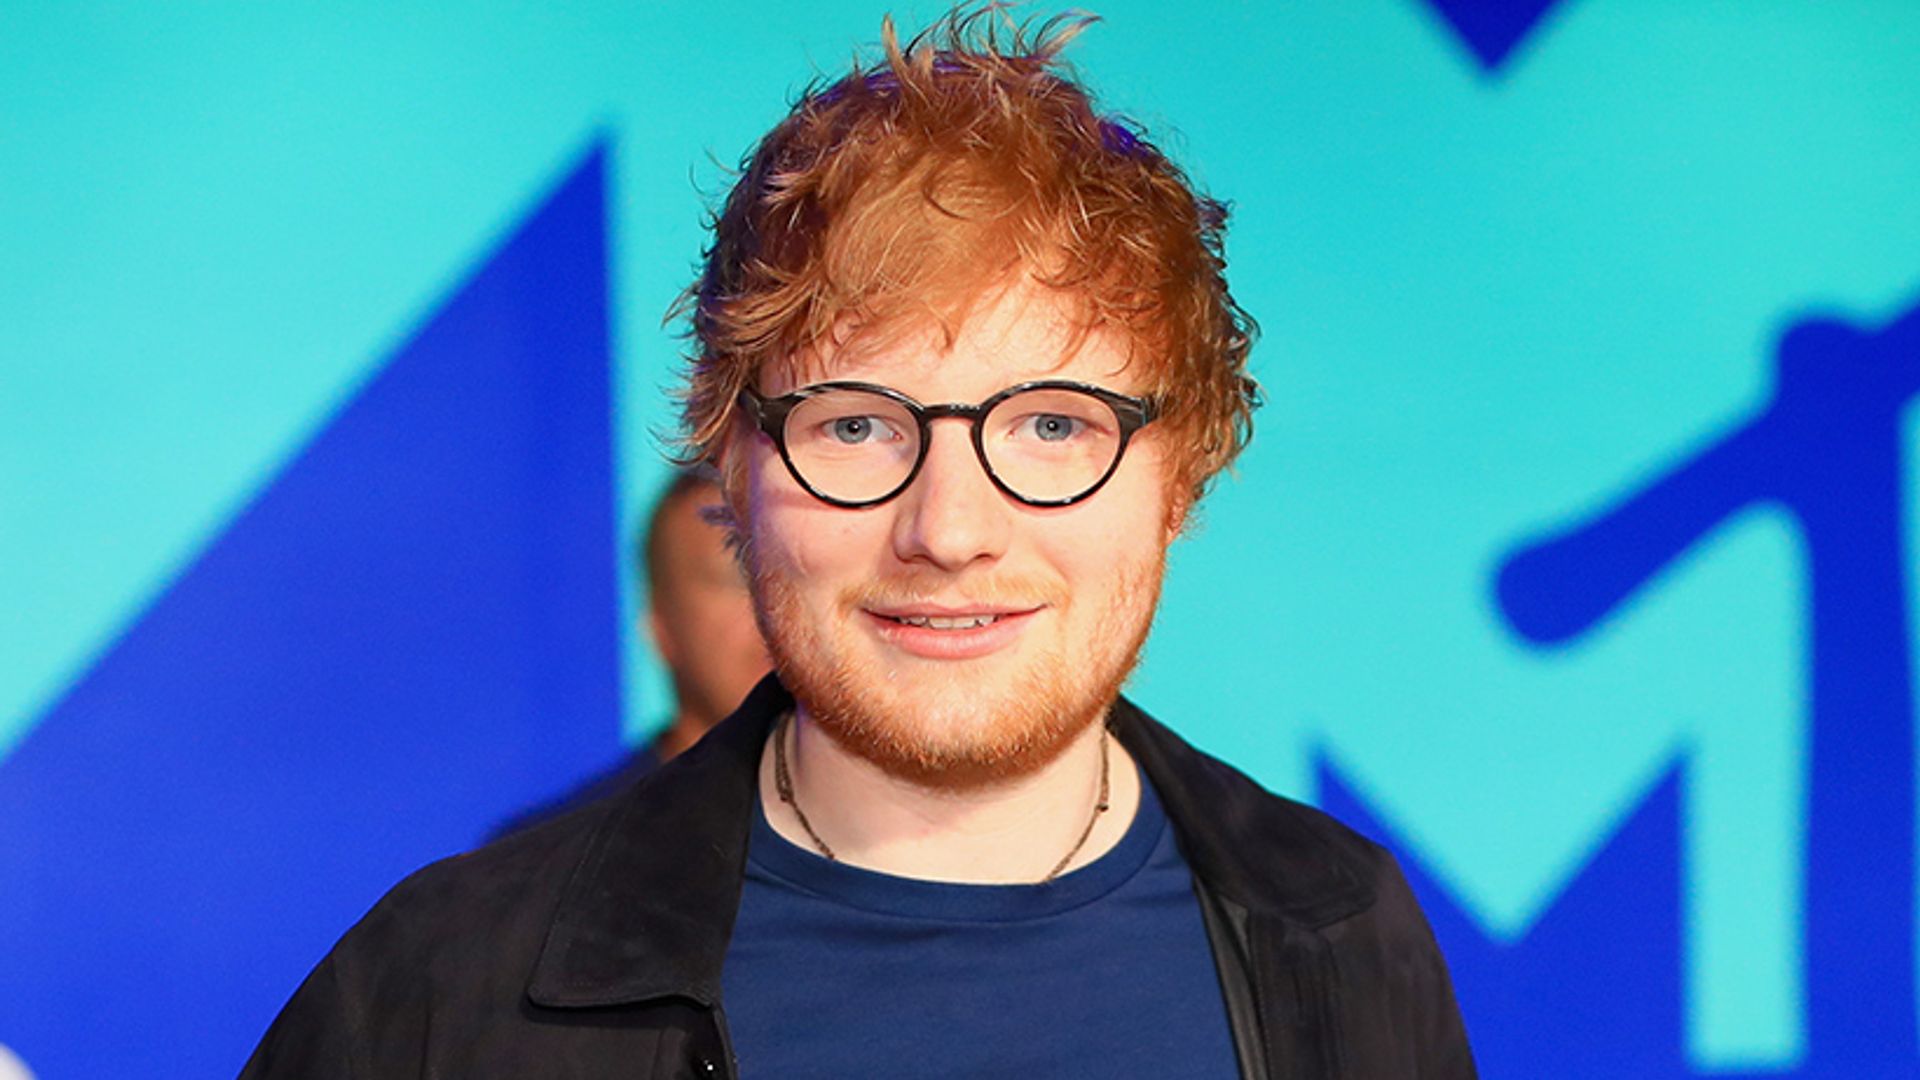 Ed Sheeran cancels Asia tour dates after being injured in bike accident